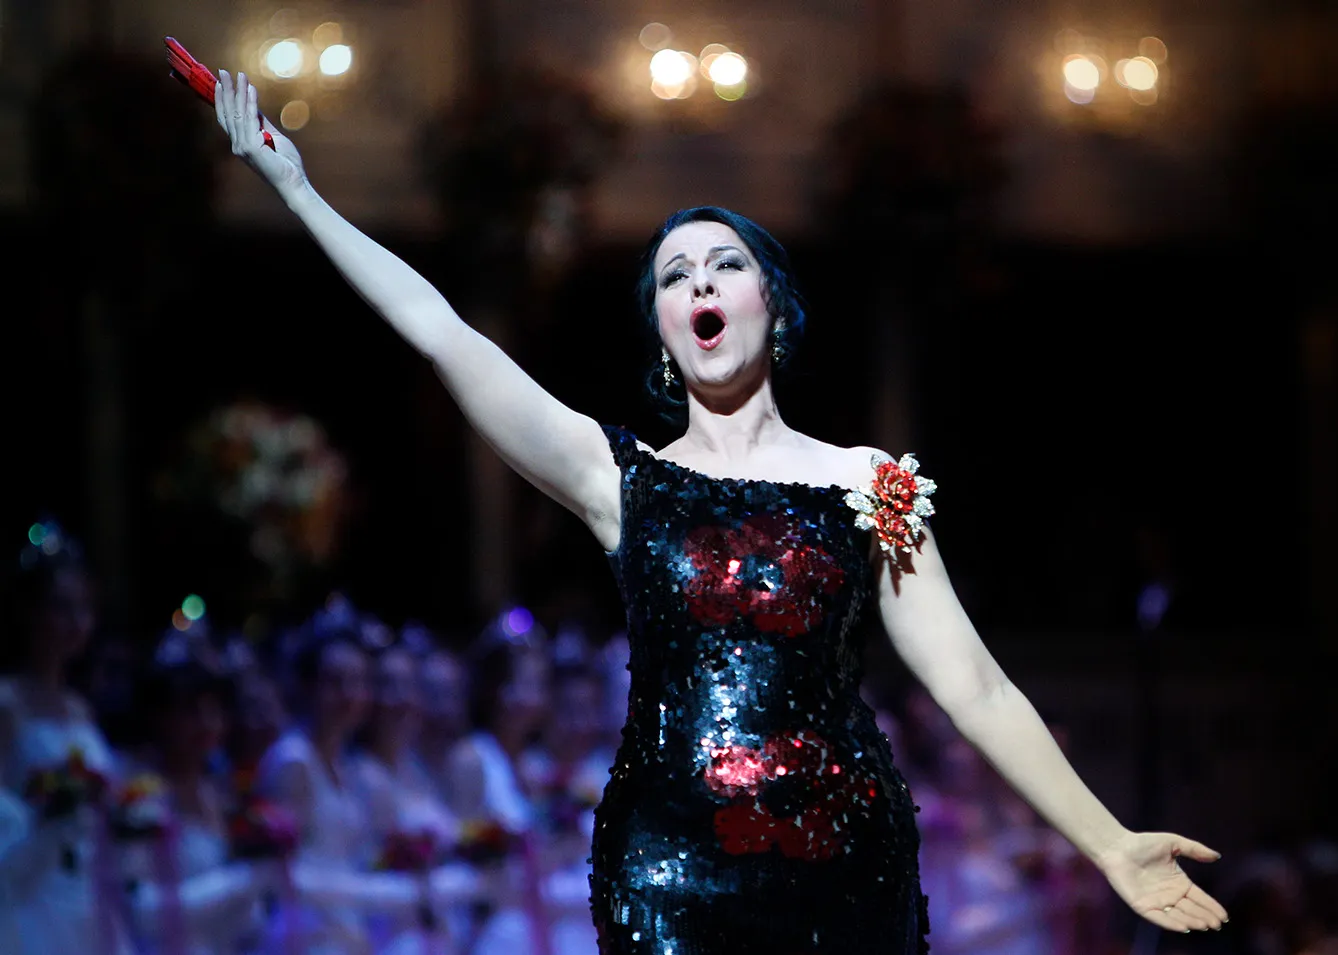 Soprano singer Angela Gheorghiu performs during the opening ceremony of the traditional Opera Ball (Opernball) in Vienna, February 16, 2012